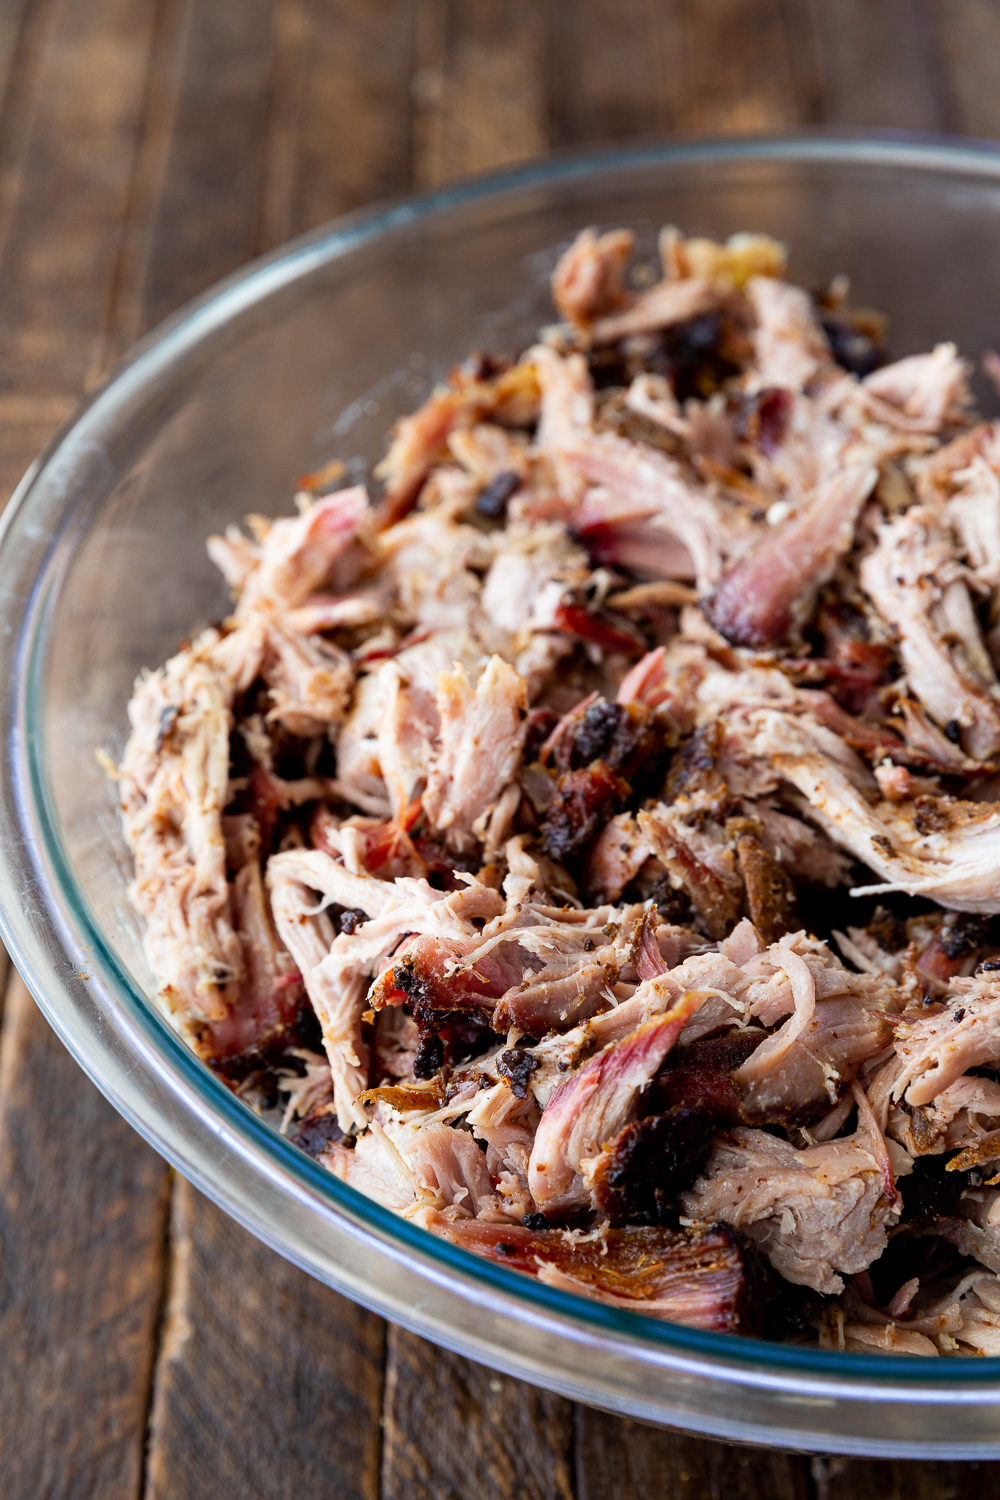 Cajun style pulled pork, cooked on a pellet smoker, and shredded. Butter soft and delicious. 